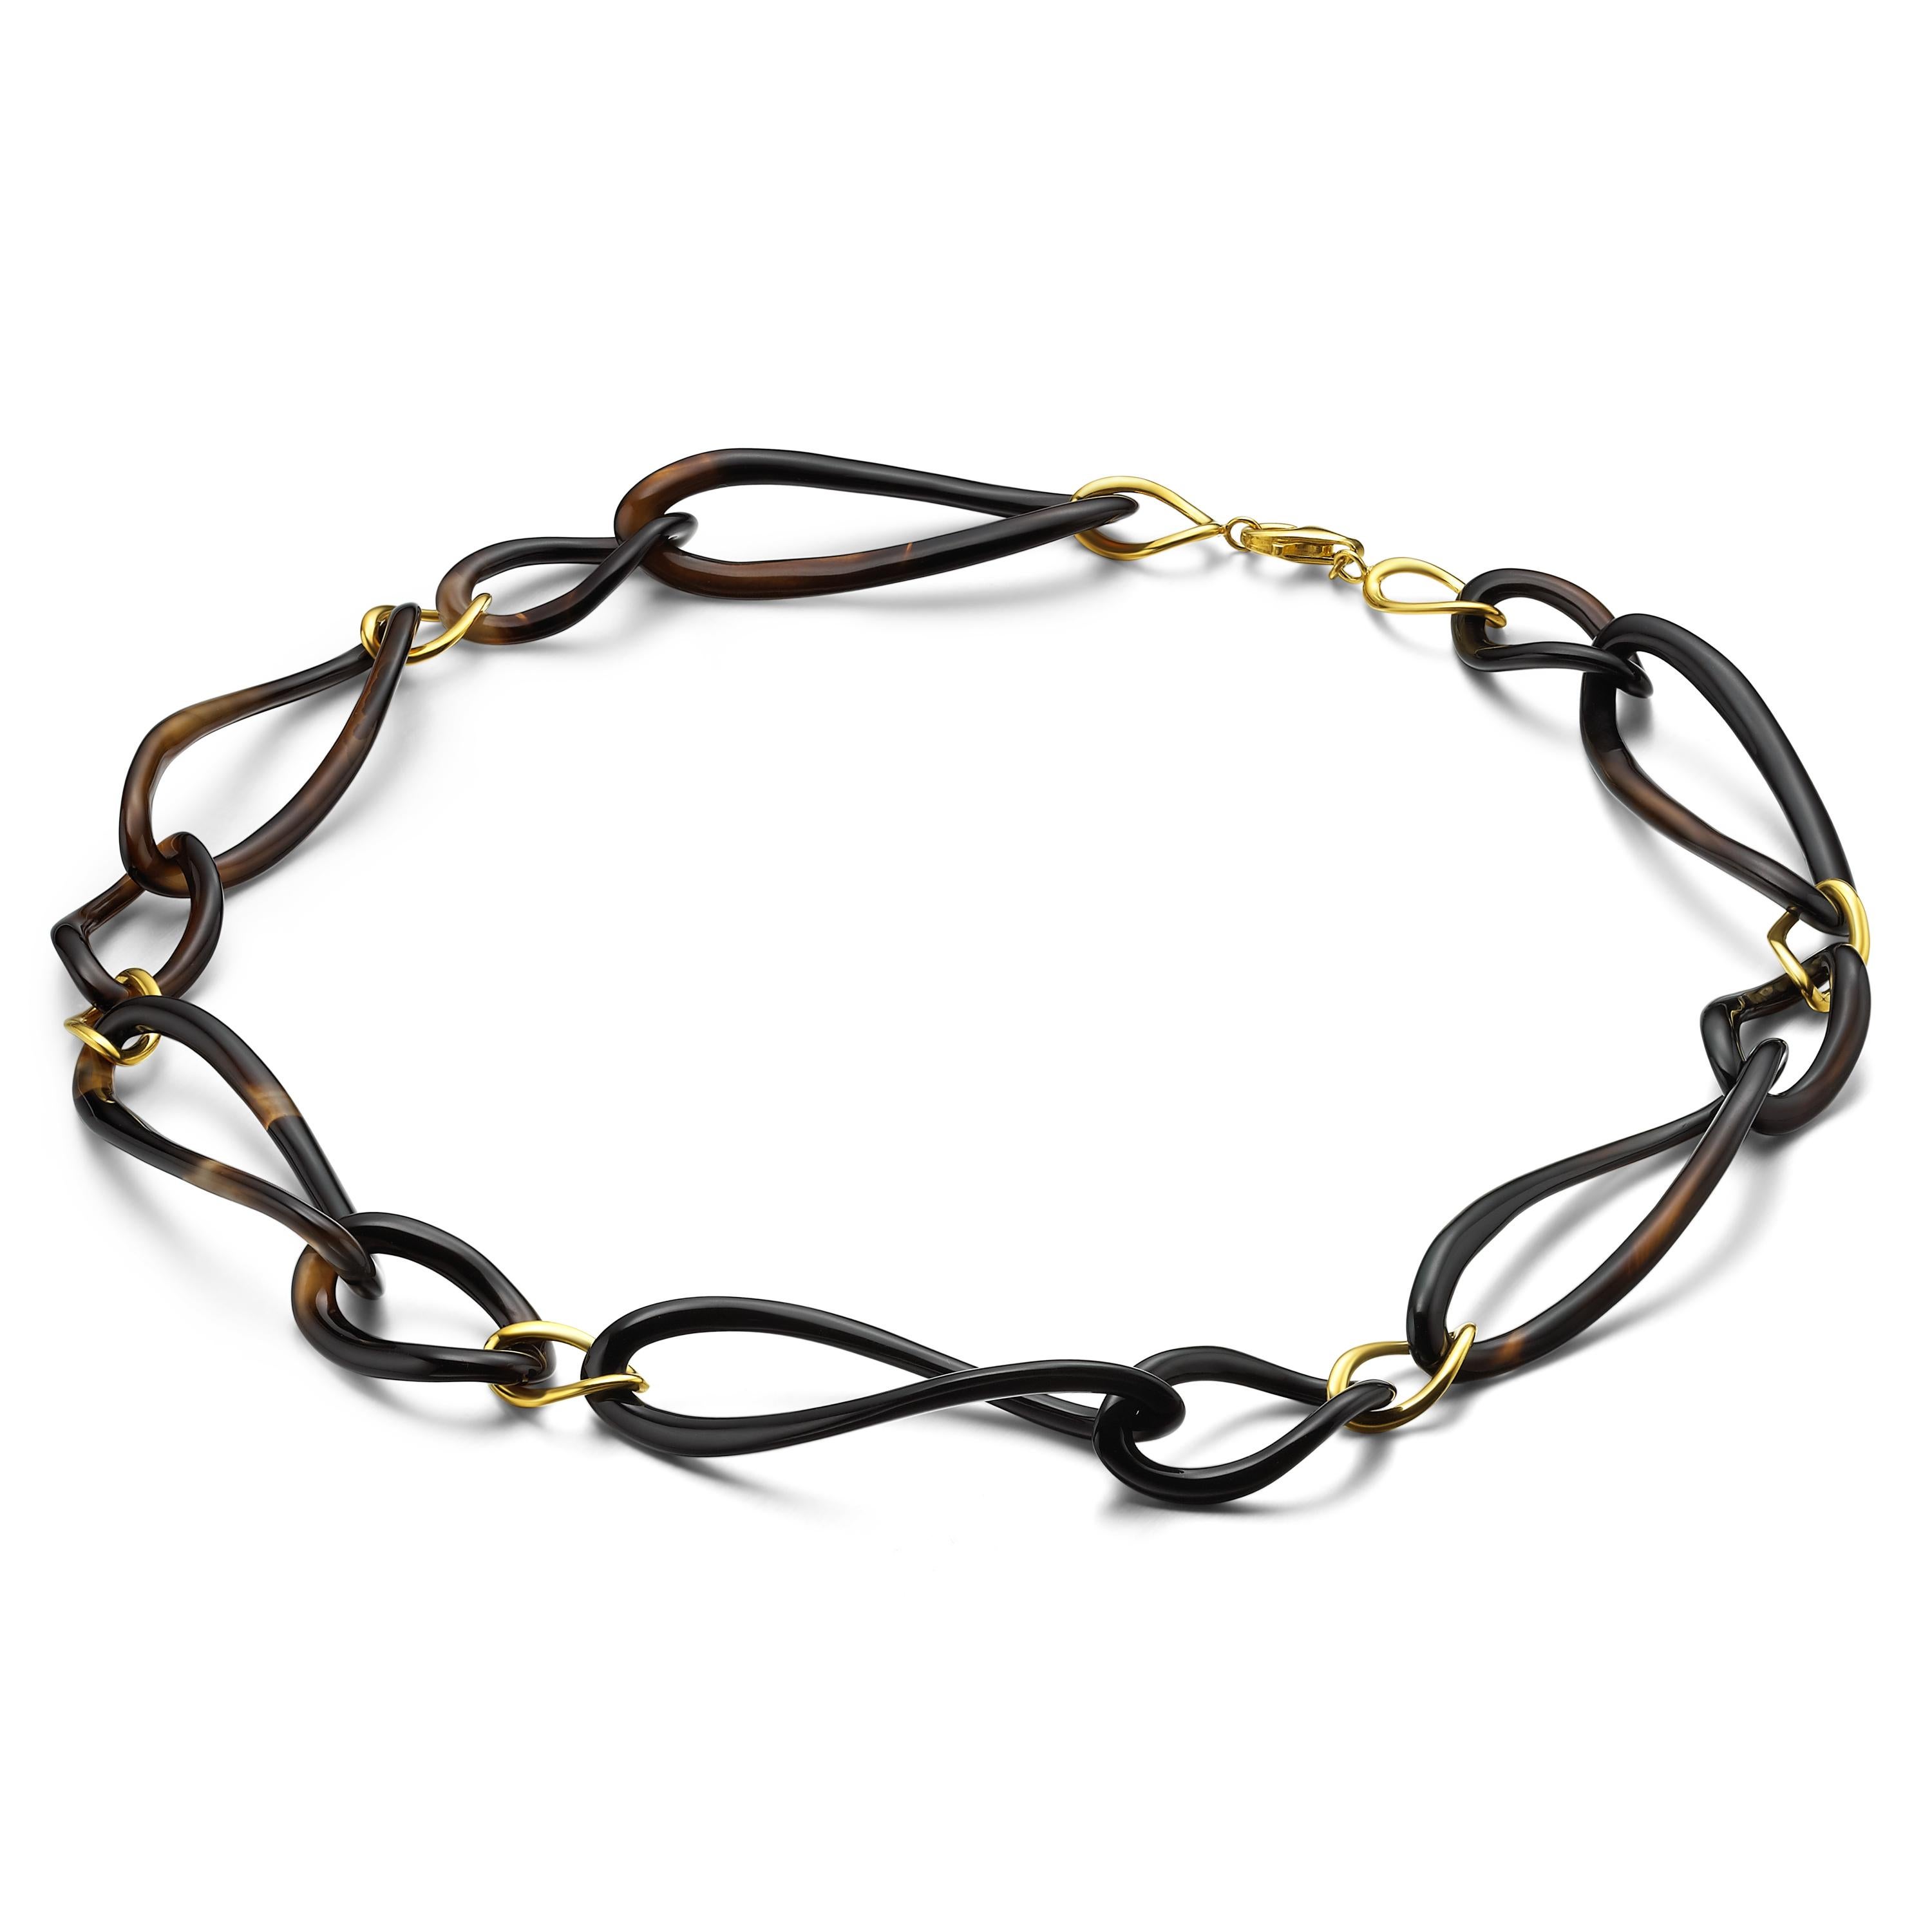 Description:
One-off black onyx link chain style necklace with 18ct yellow gold plate on sterling silver links.

Inspiration:
Onyx is a variety of the microcrystalline quartz, called chalcedony. The name 'chalcedony' comes from Calcedon or